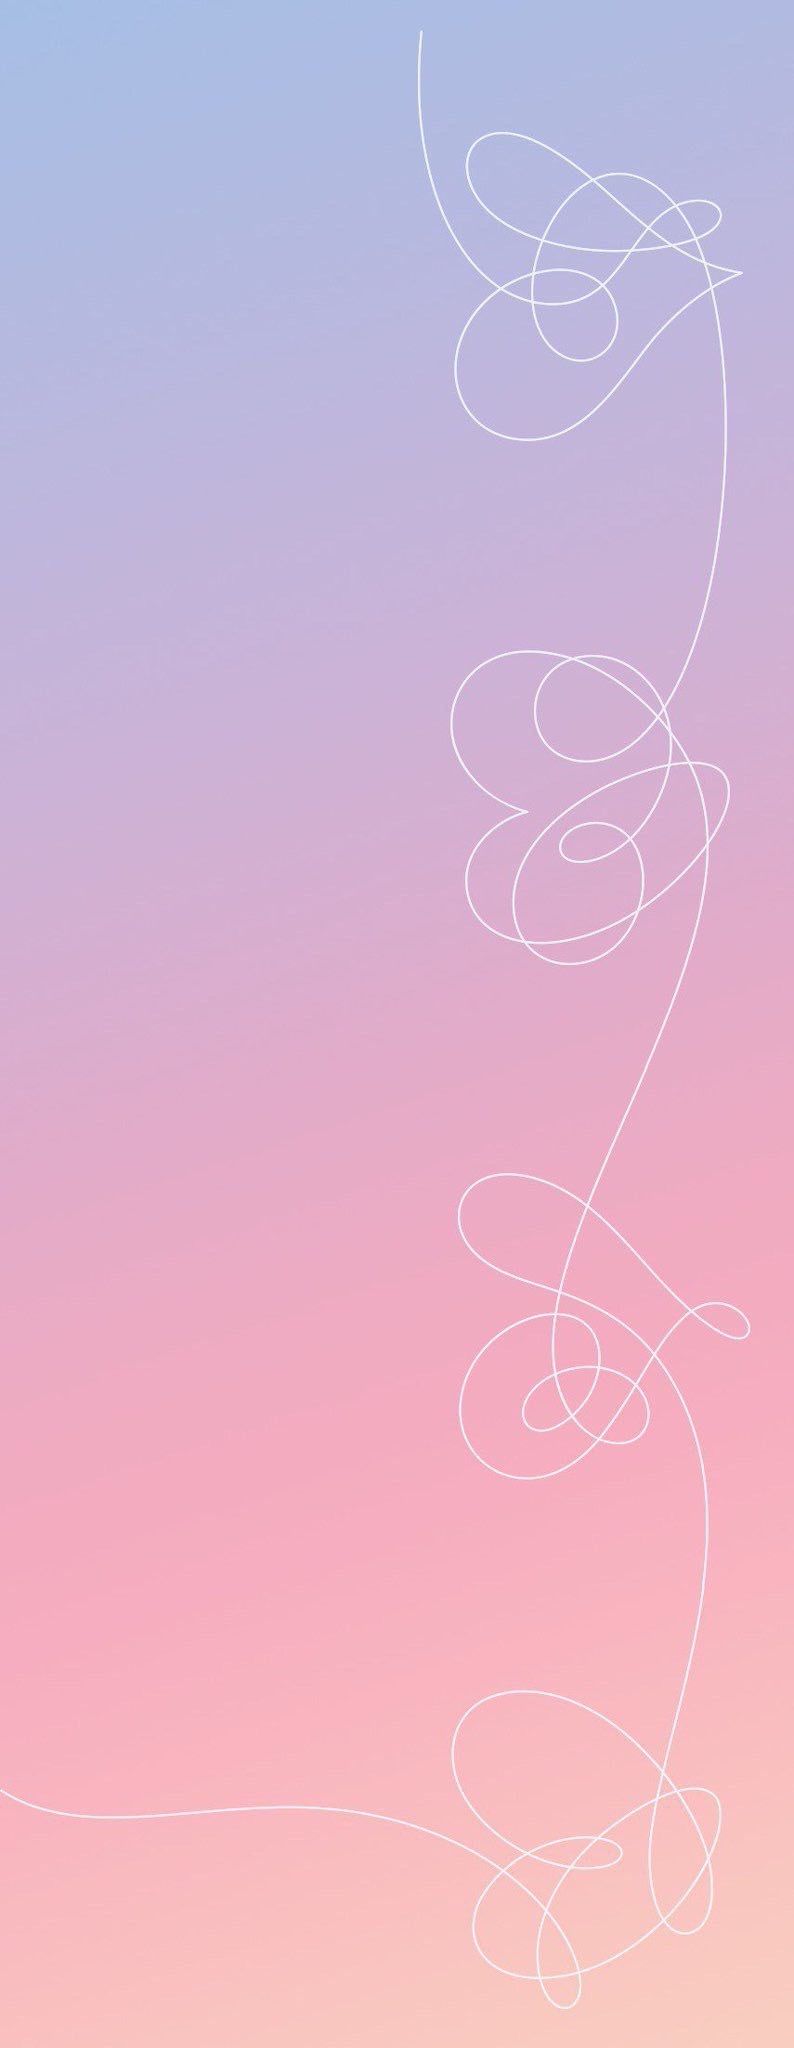 Bts Love Yourself Iphone Wallpapers On Wallpaperdog